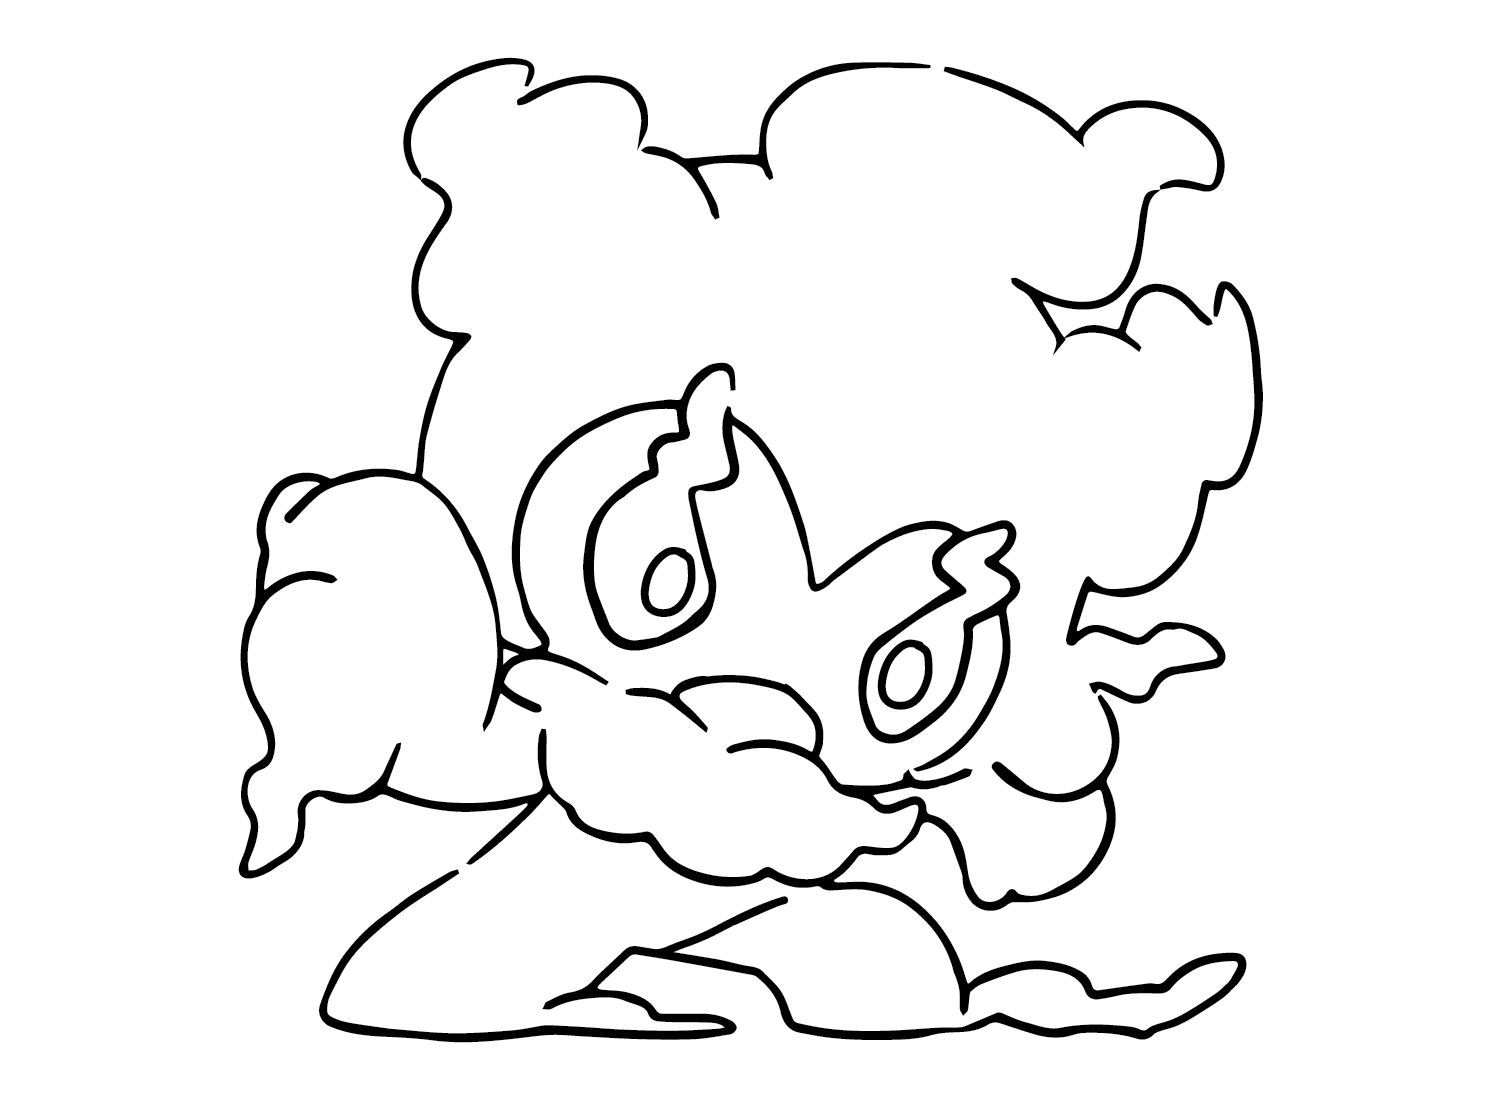 The Pokemon Marshadow Coloring Page